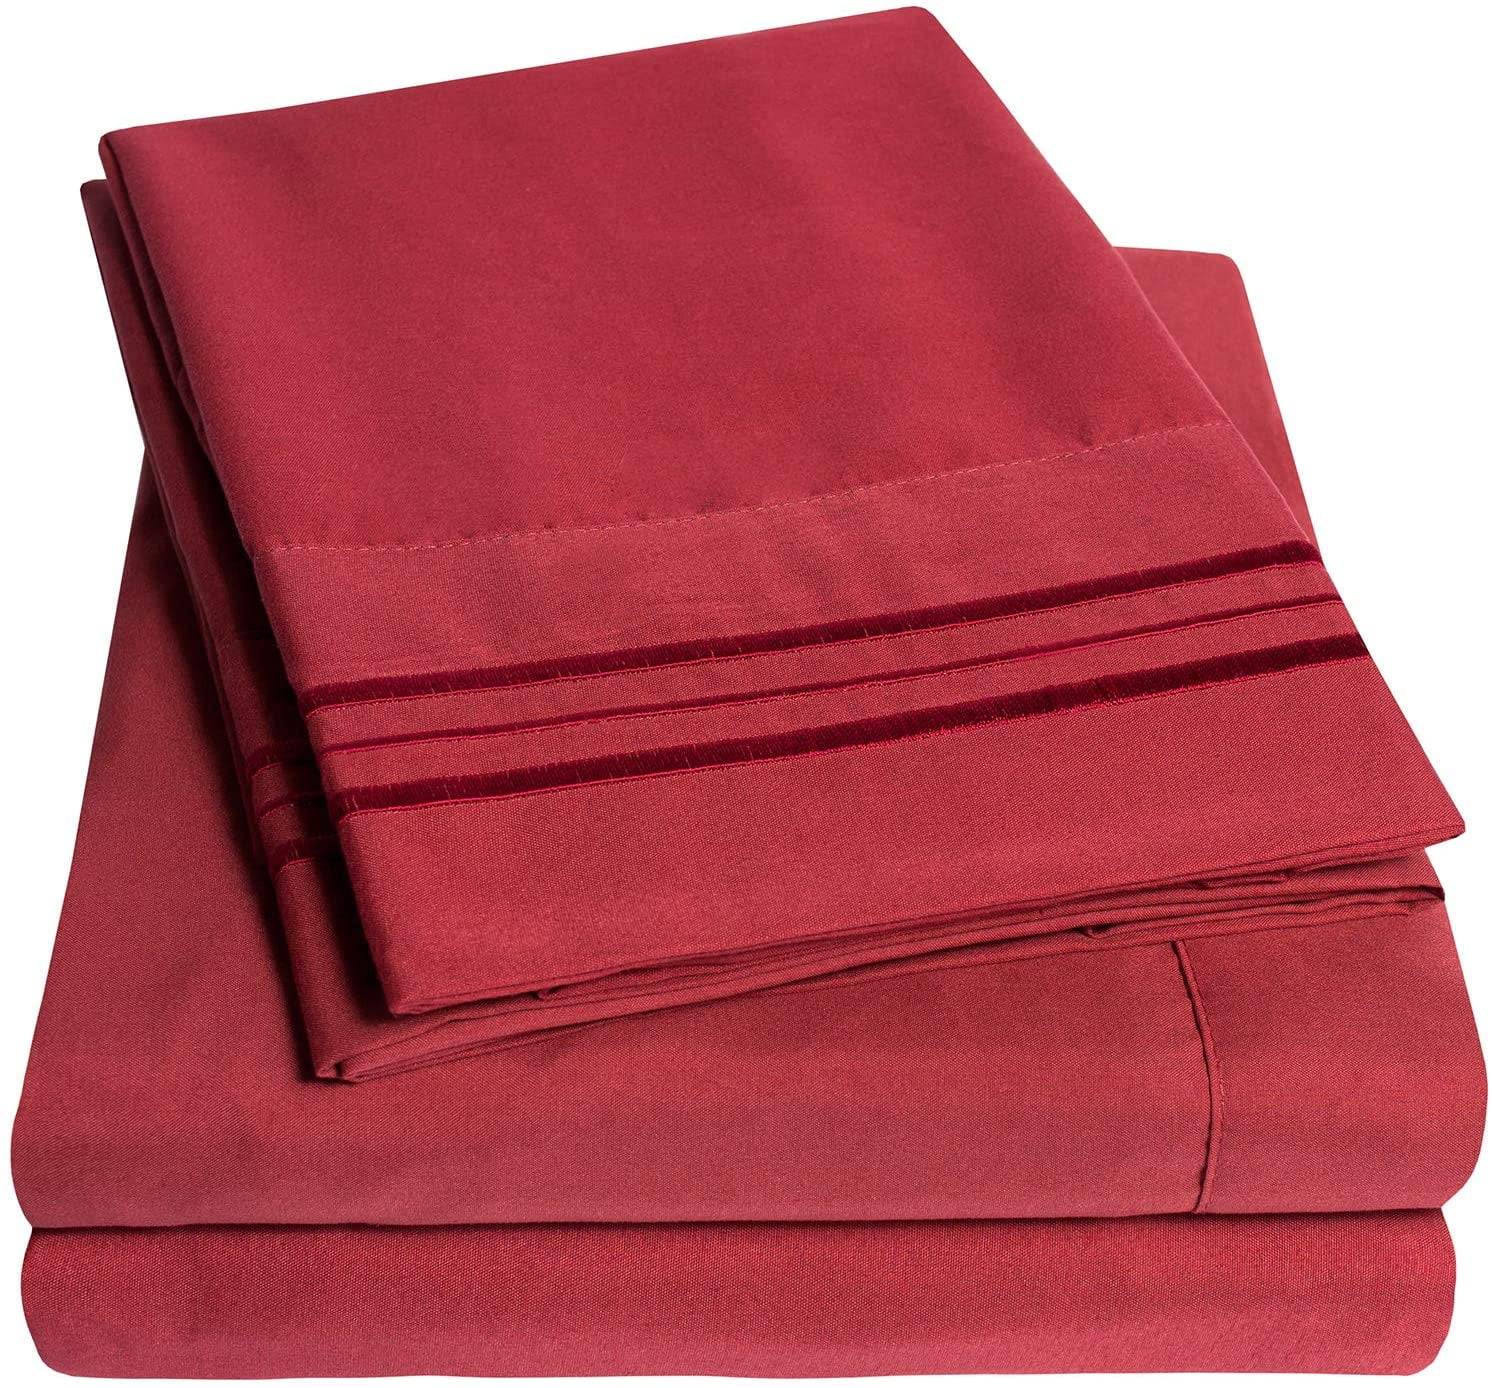 Burgundy 21” Extra Deep Pocket Ultra Soft Fitted Sheet with Corner Straps,King 